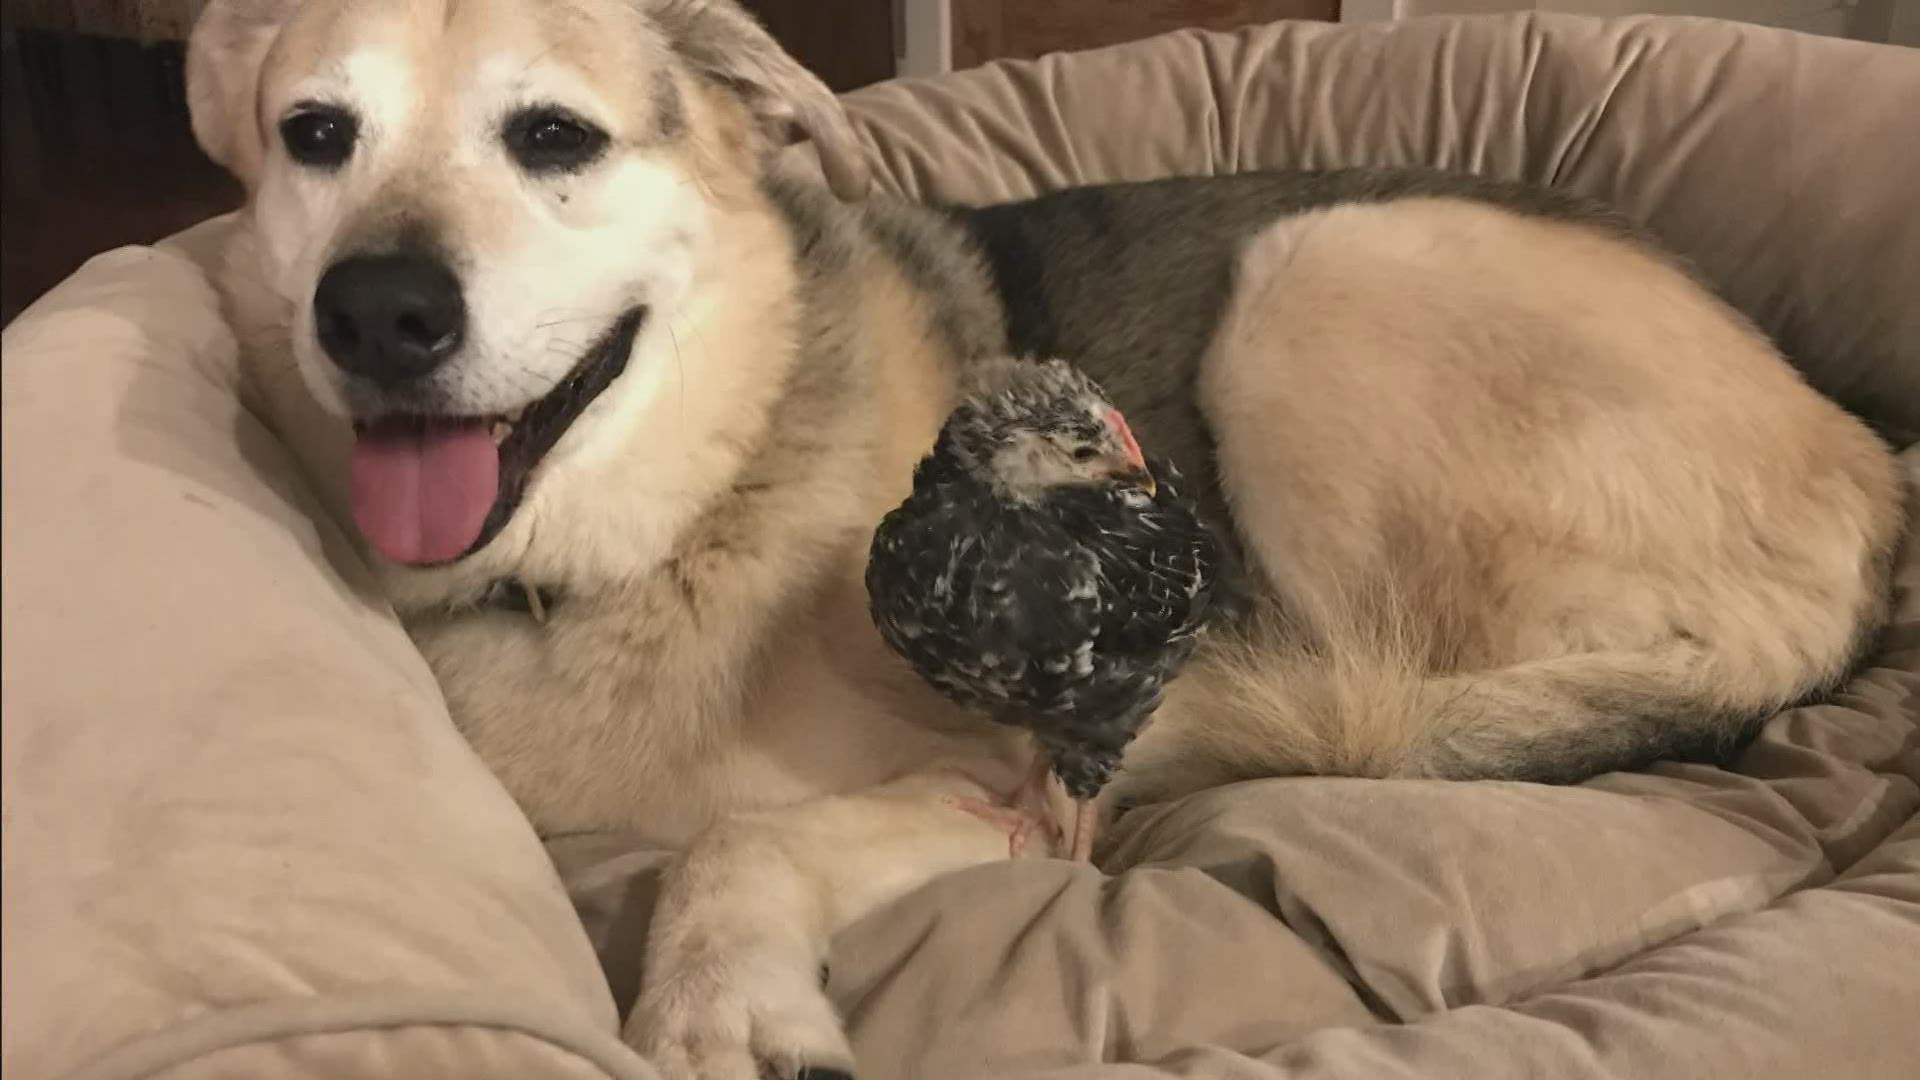 When a chicken made its way into a Maine home, the homeowner had no idea it would lead to a strong bond with the family dog.